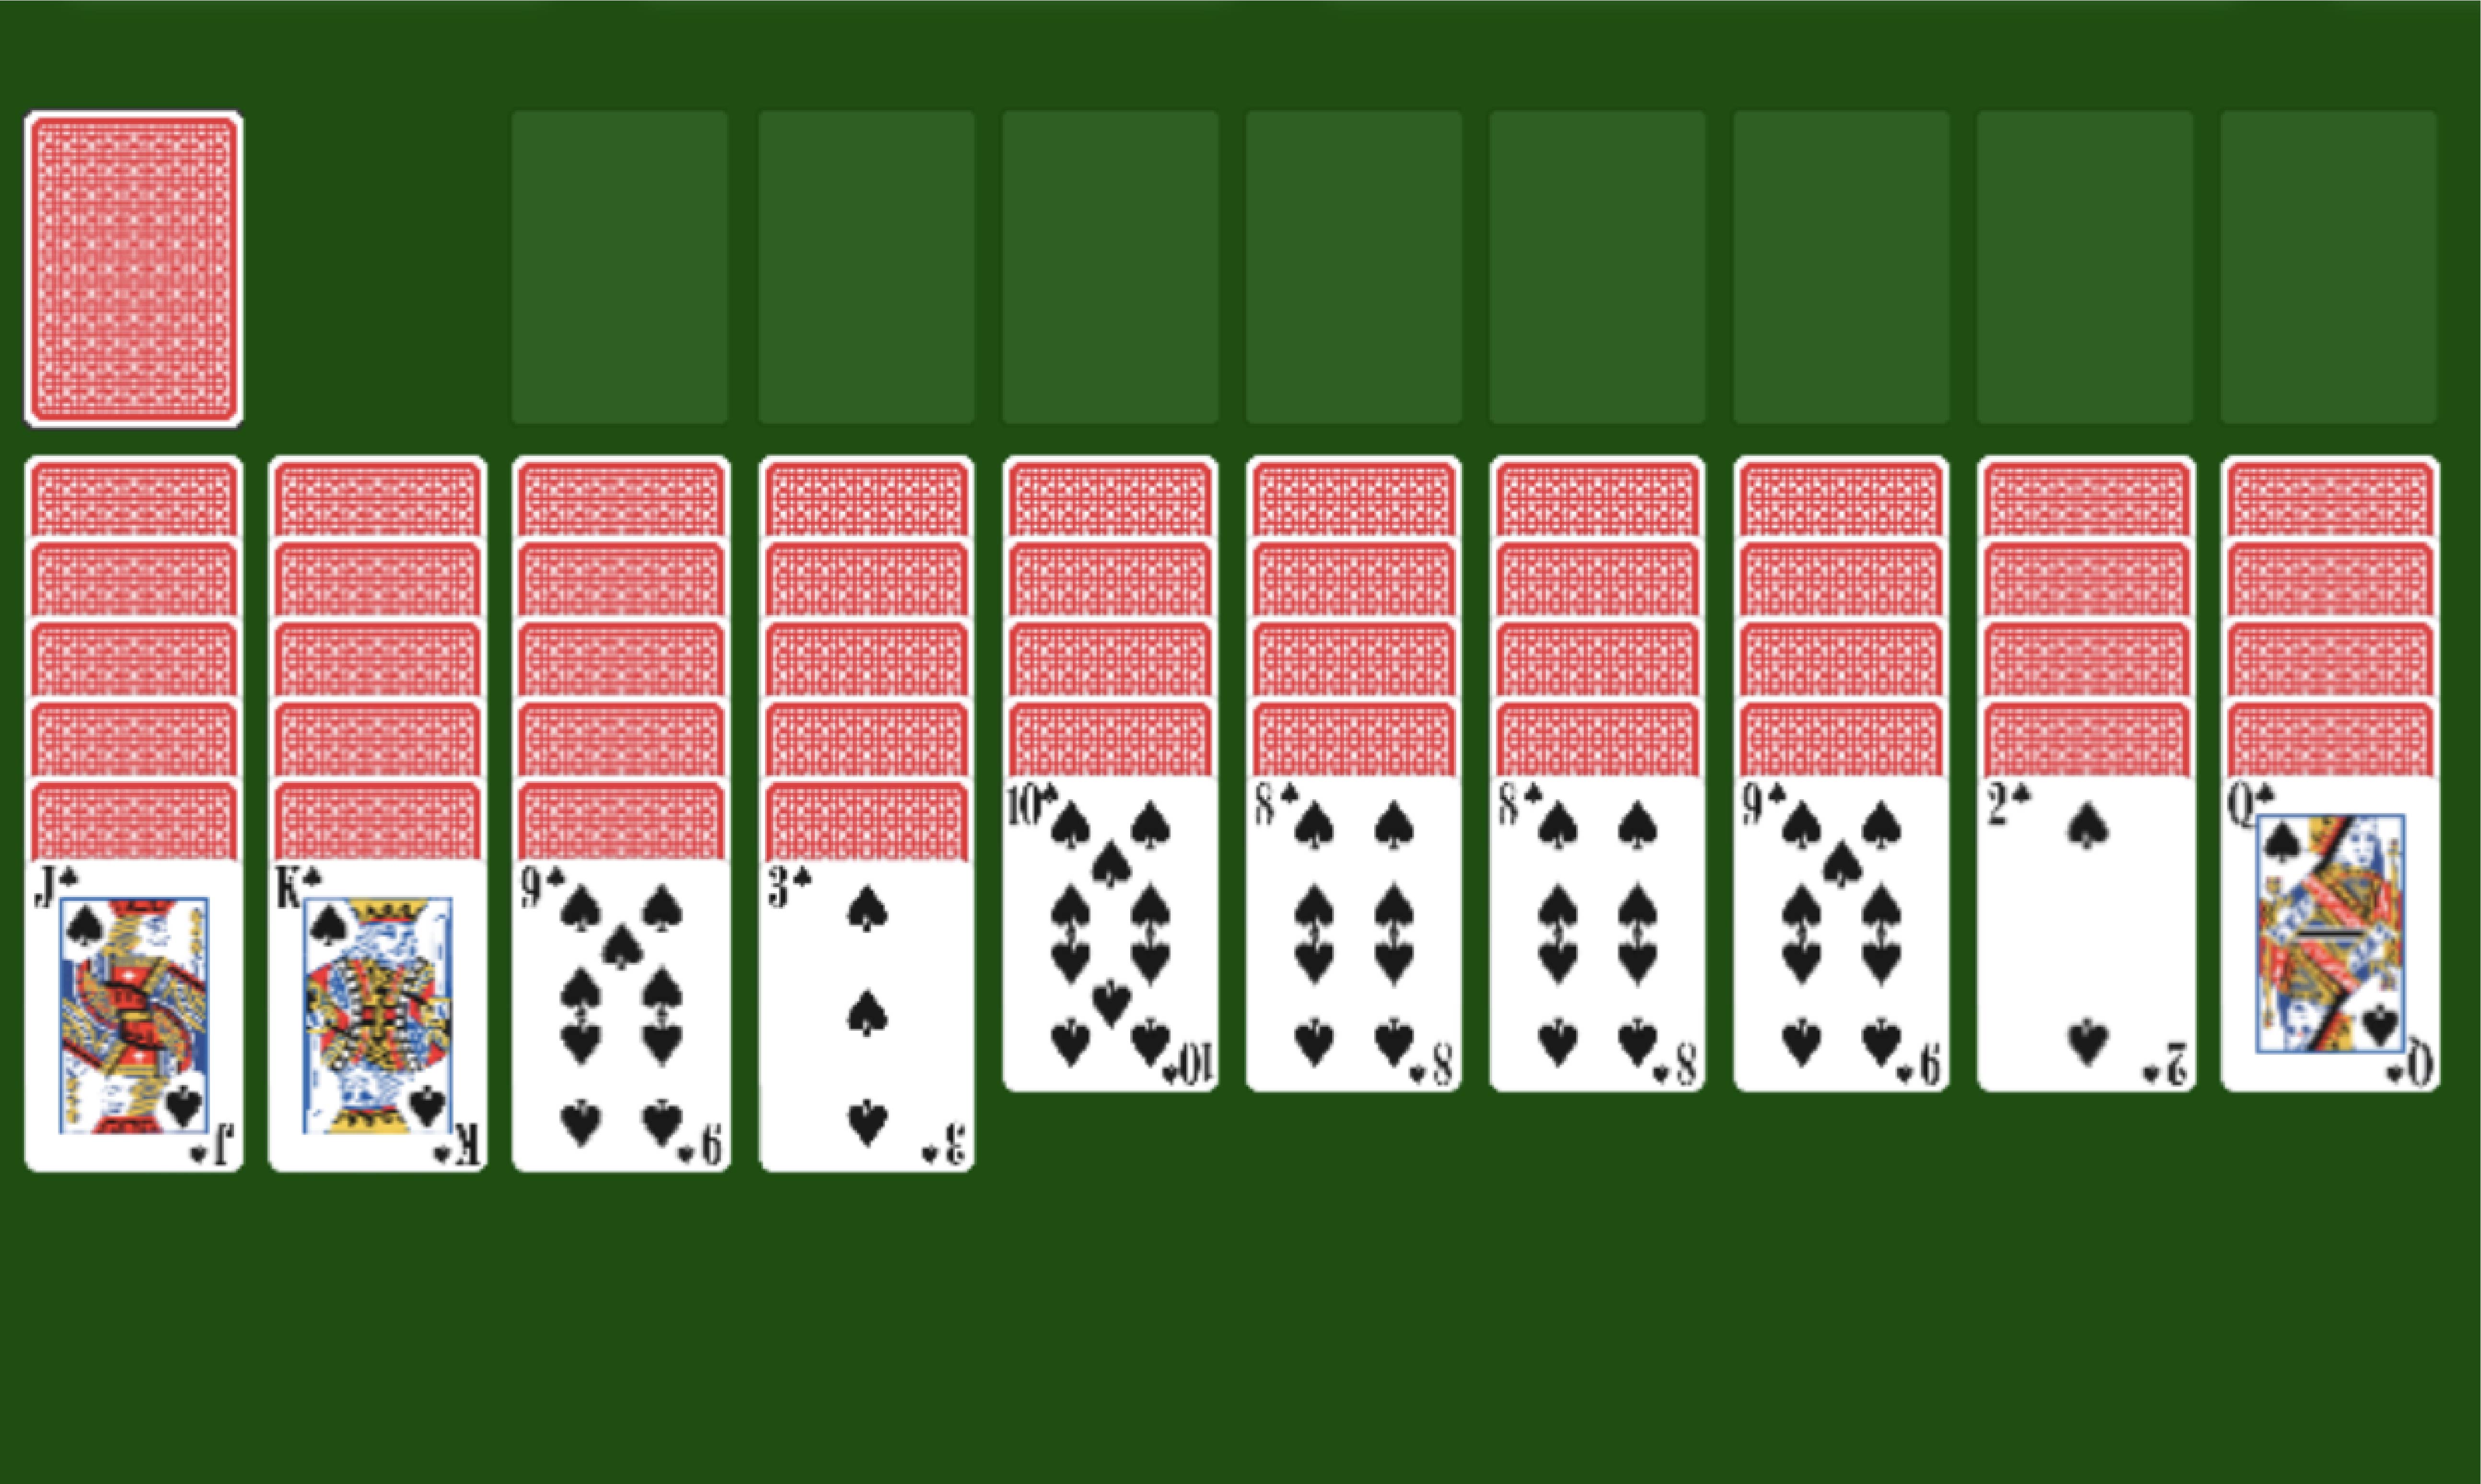 spider solitaire game free download